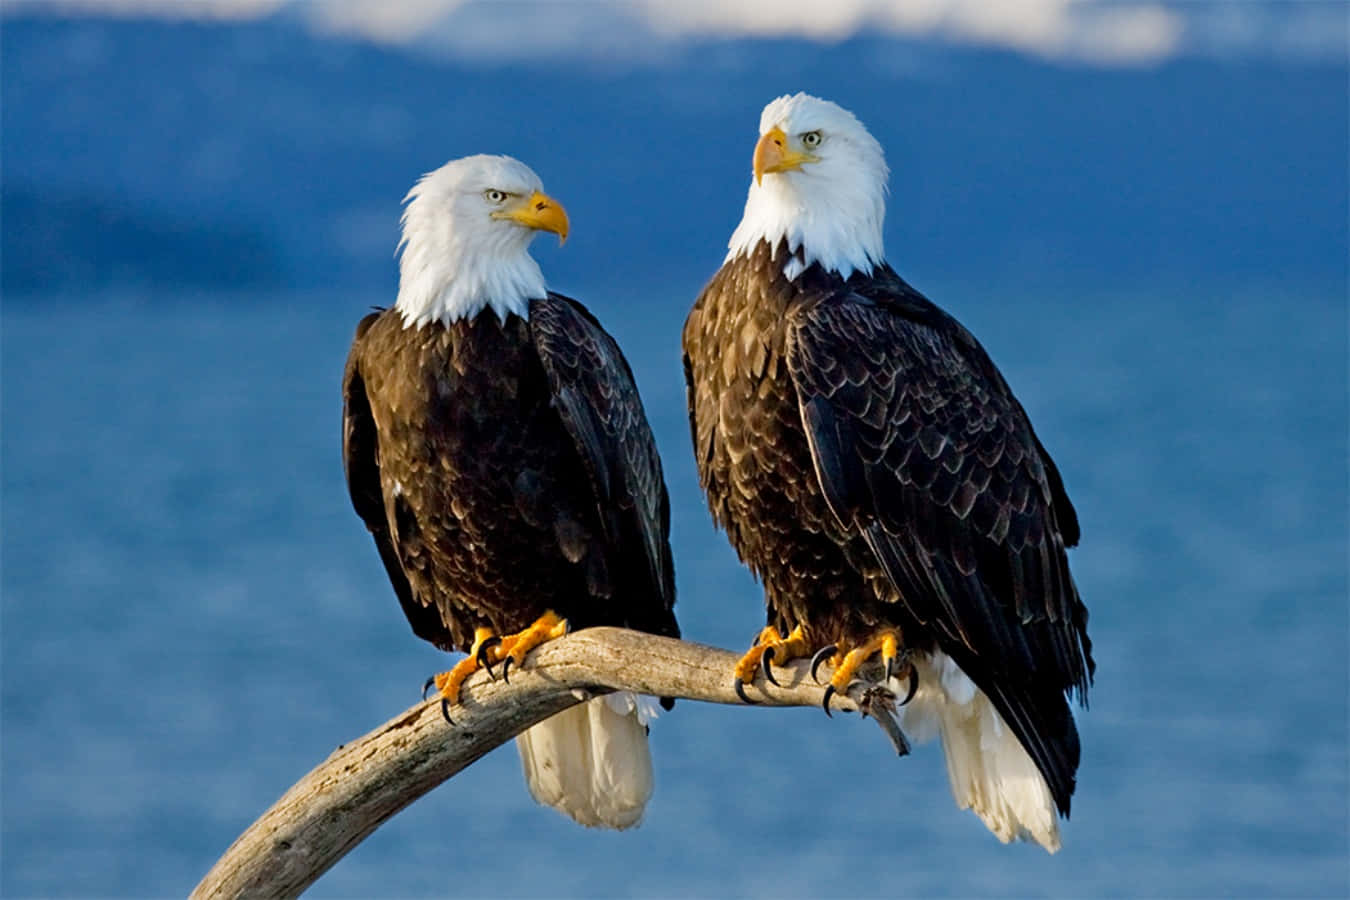 Two majestic Bald Eagles soar through a cloudy sky